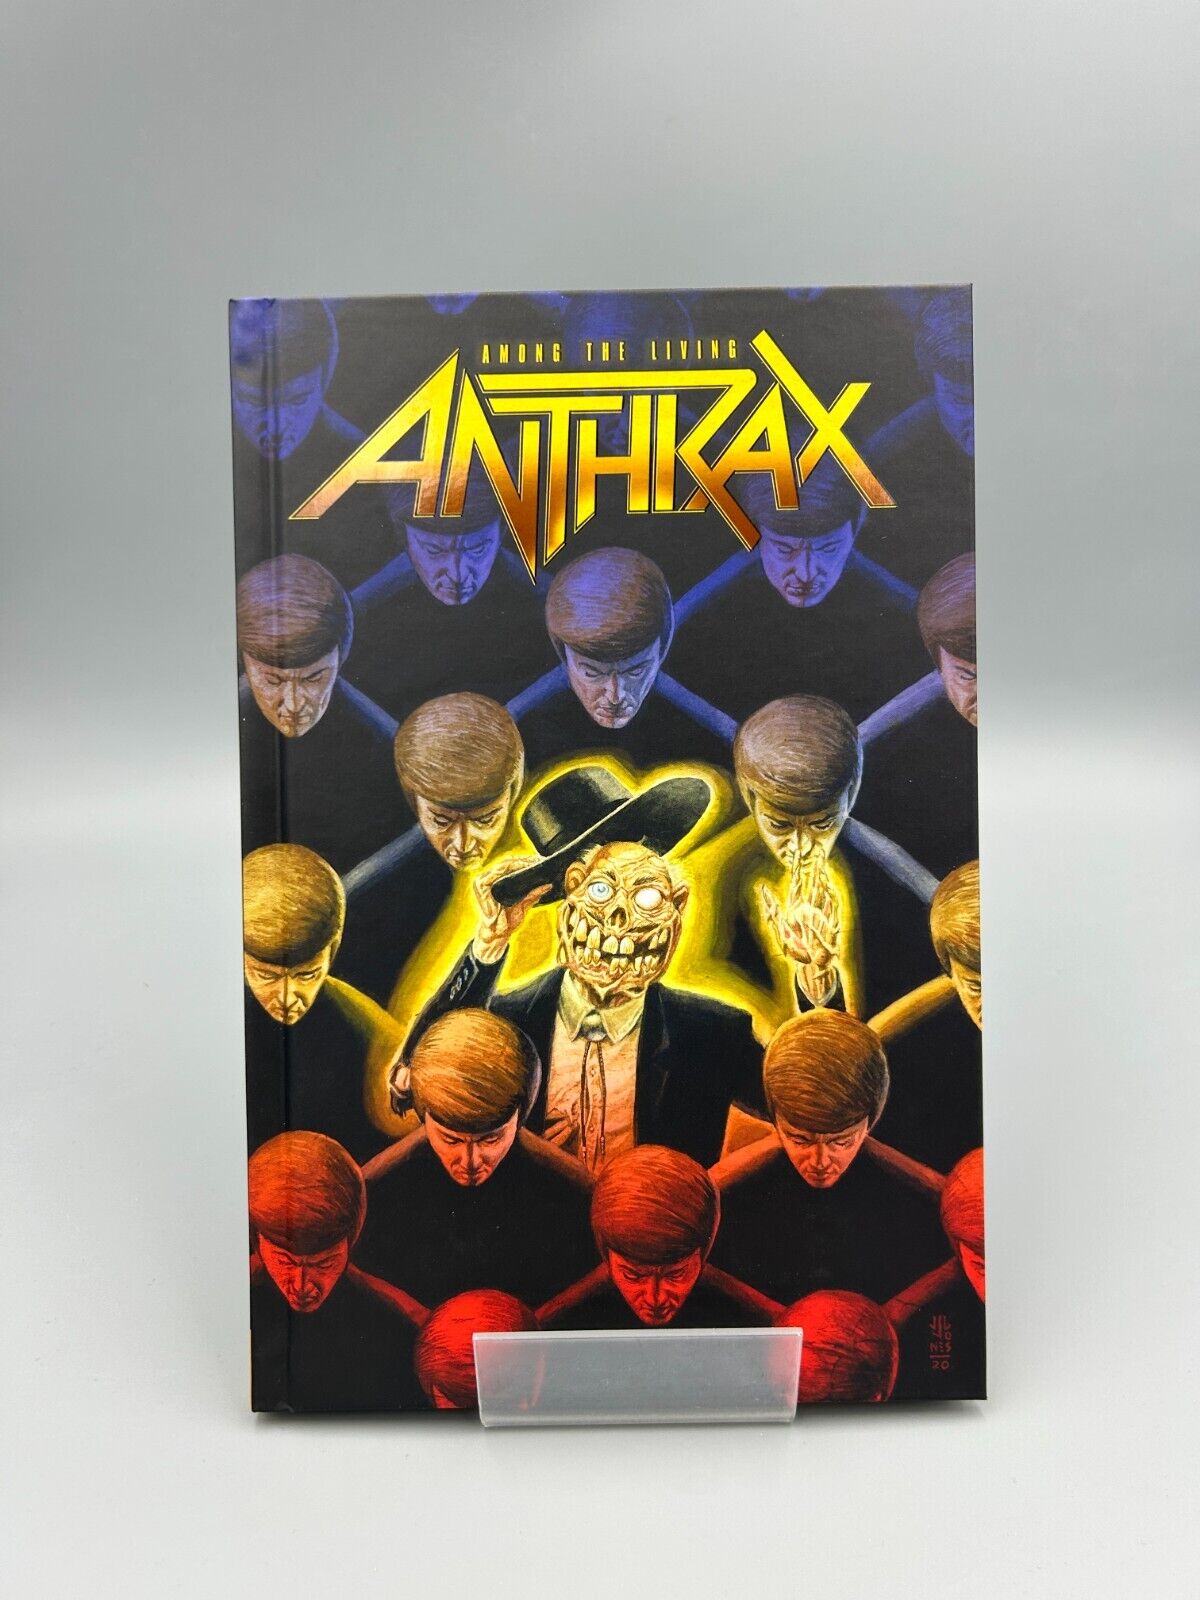 Anthrax - Among The Living Graphic Novel/Comic Book - Hardcover